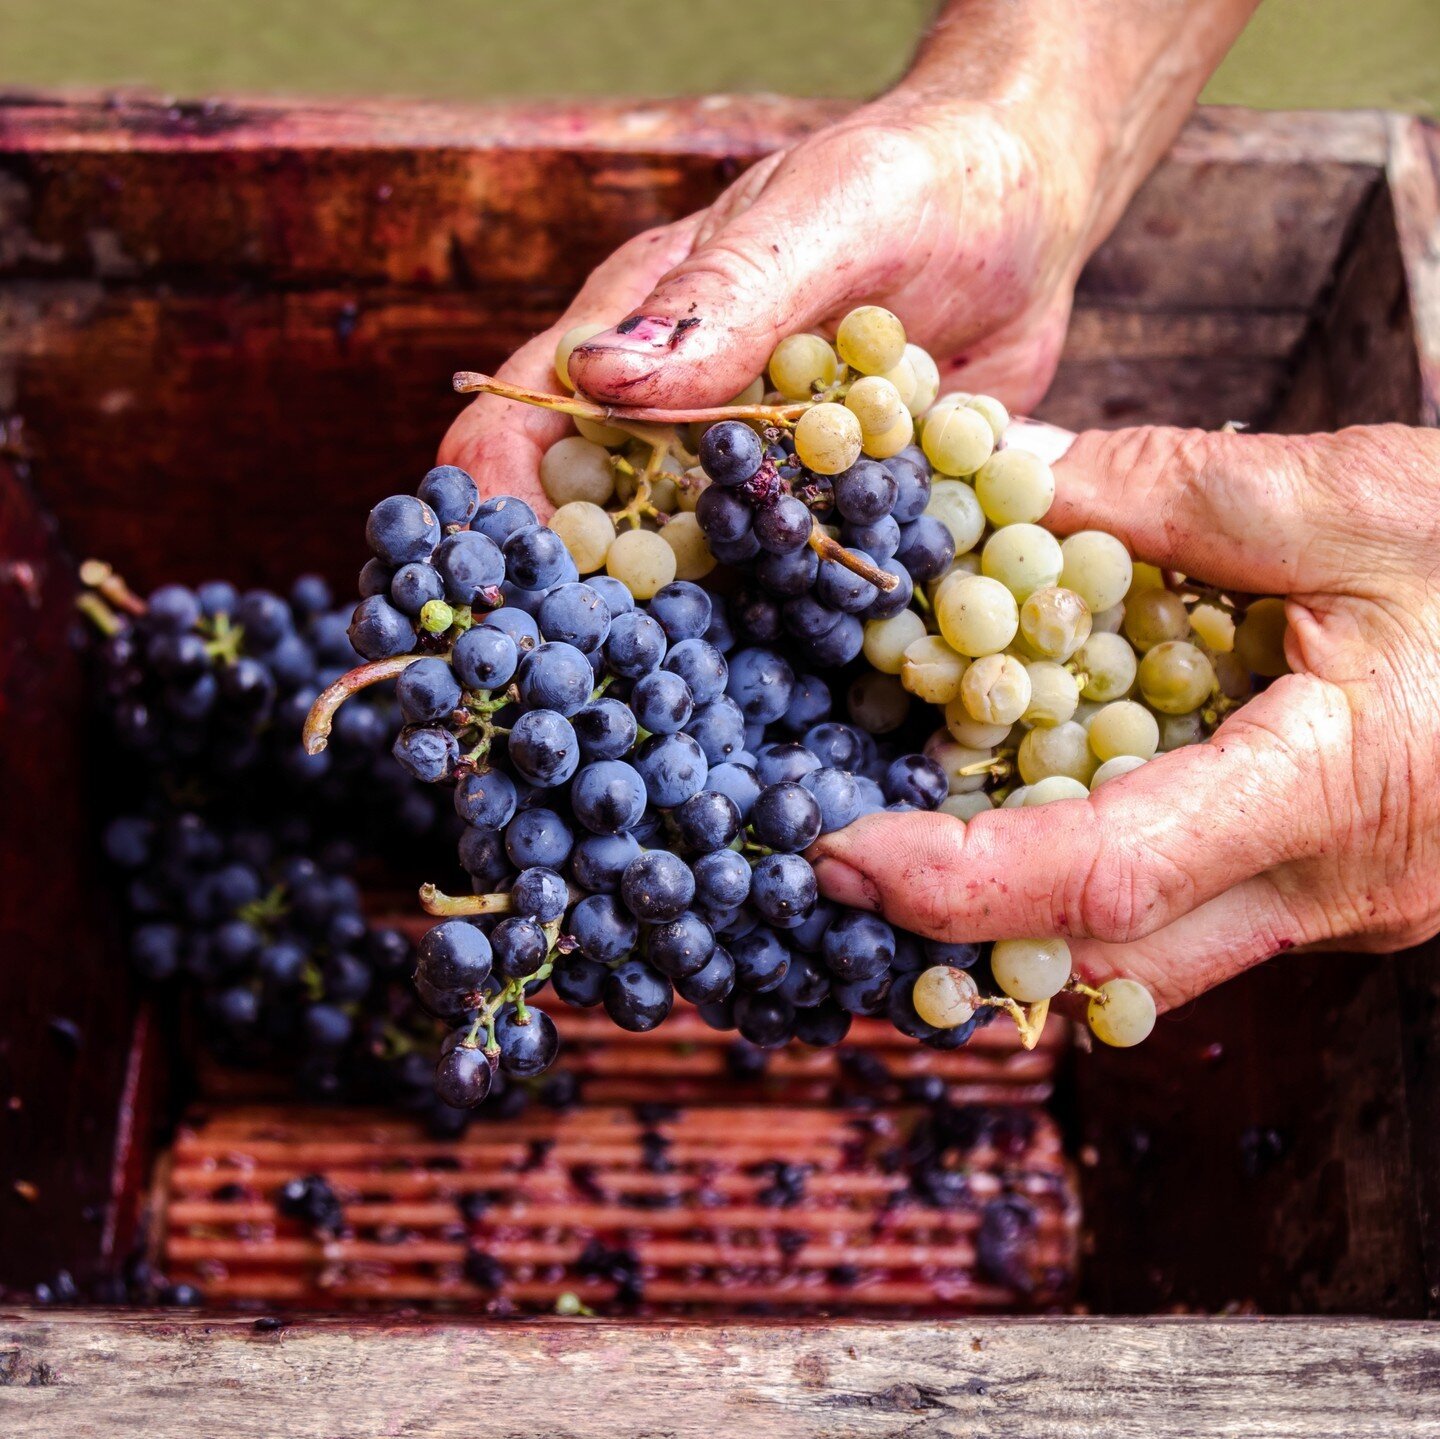 Did you know that Pinot Noir and Chardonnay are the two vital grapes in Champagne?⁠
⁠
⁠
#sunvalleywineco #winefact #champagne #winegrapes #pinotnoir #pinot #chardonnay #australianwine